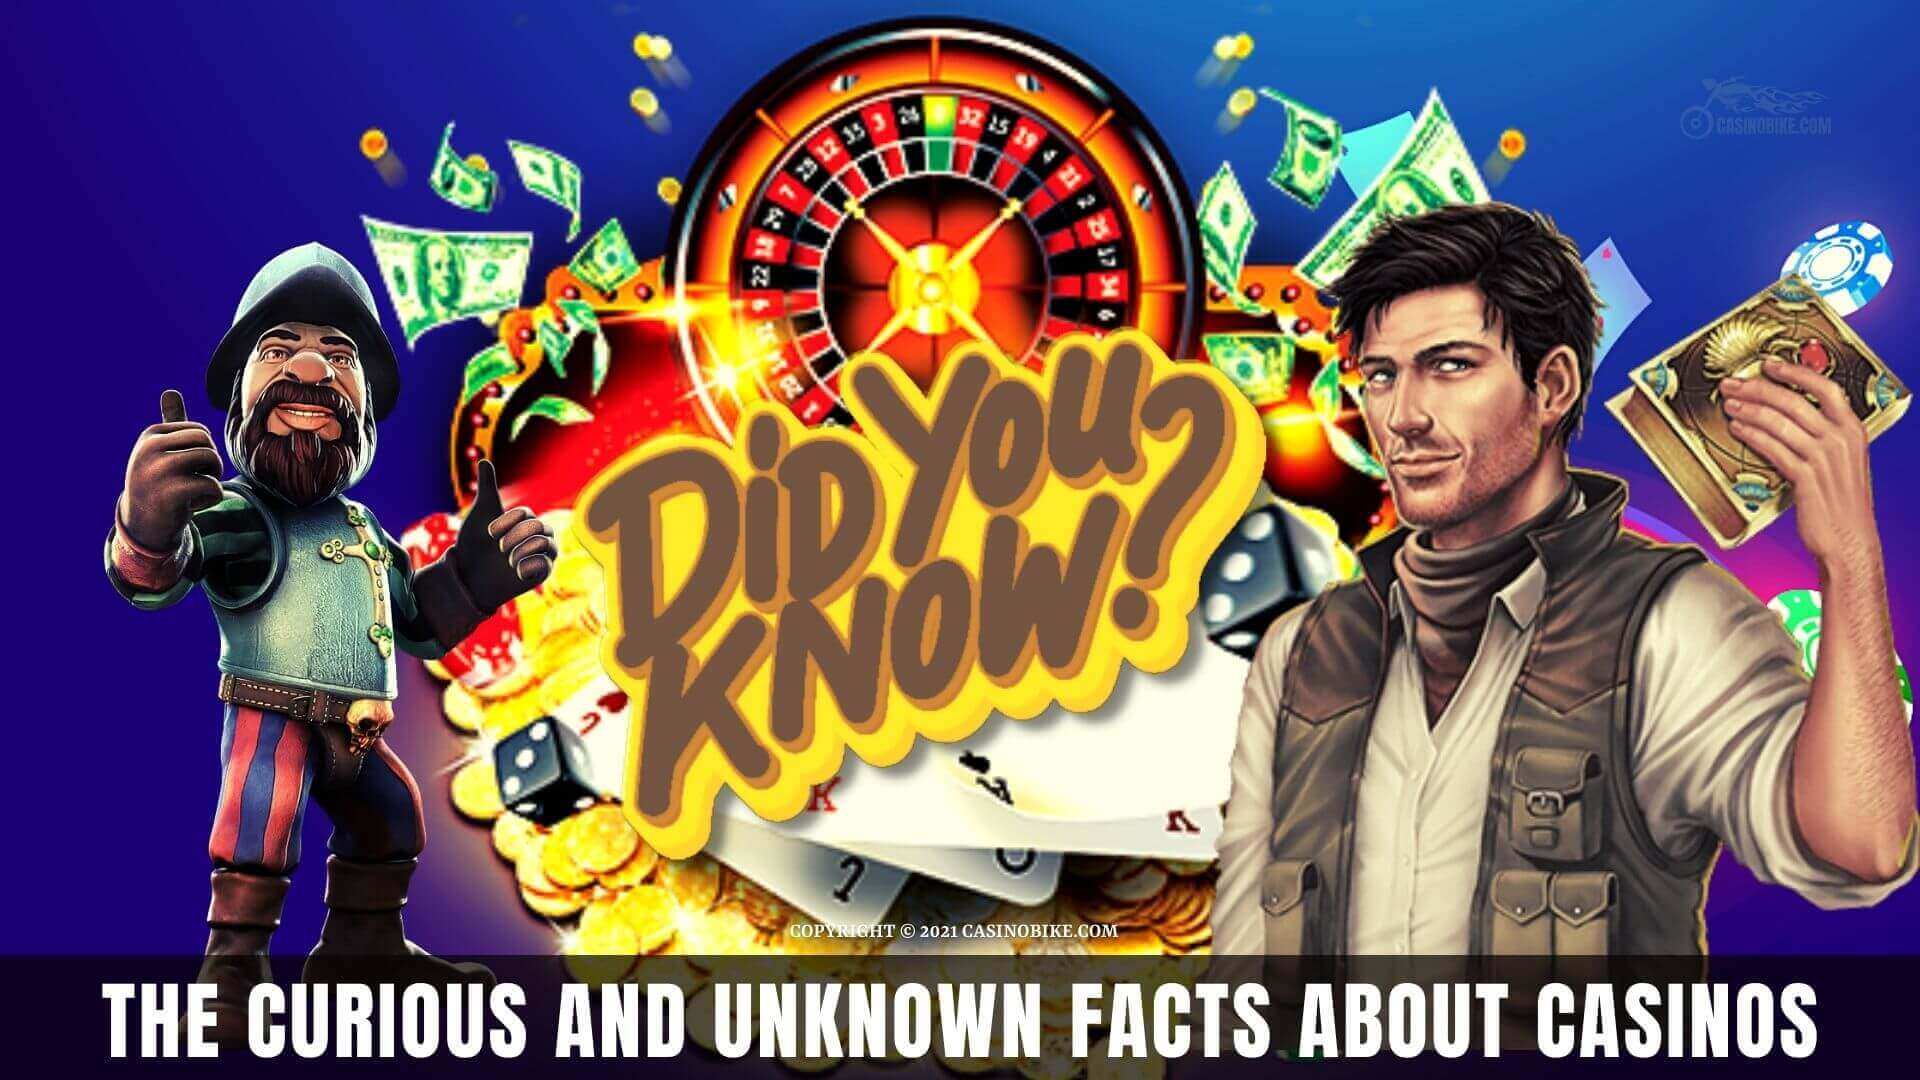 Facts About Casinos That You Probably Didn't Know